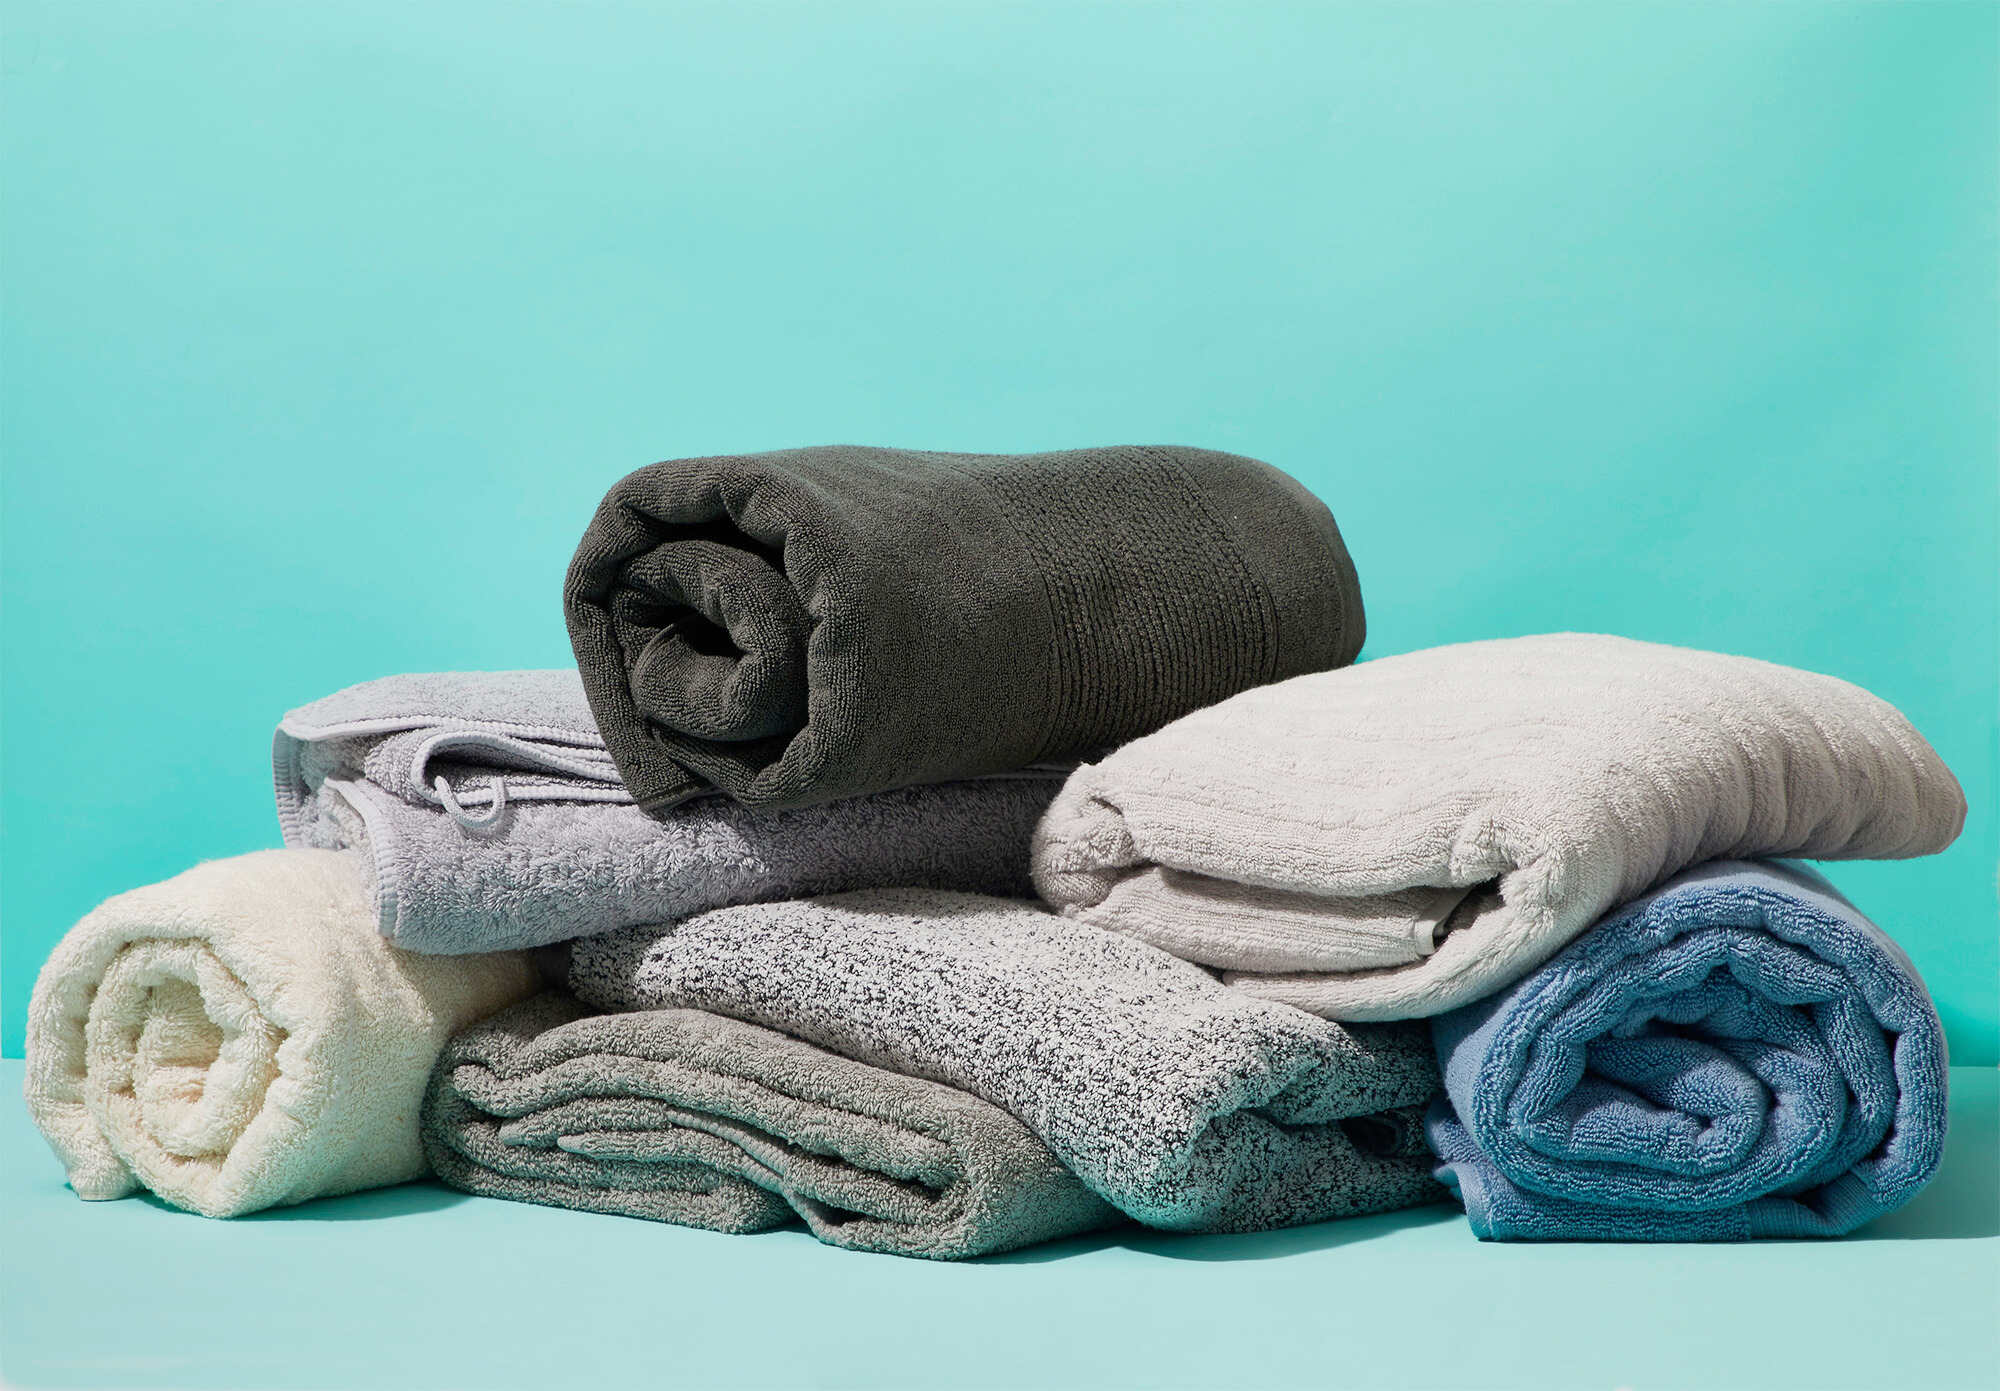 The Ultimate Guide To Buying And Caring For Bath Linens